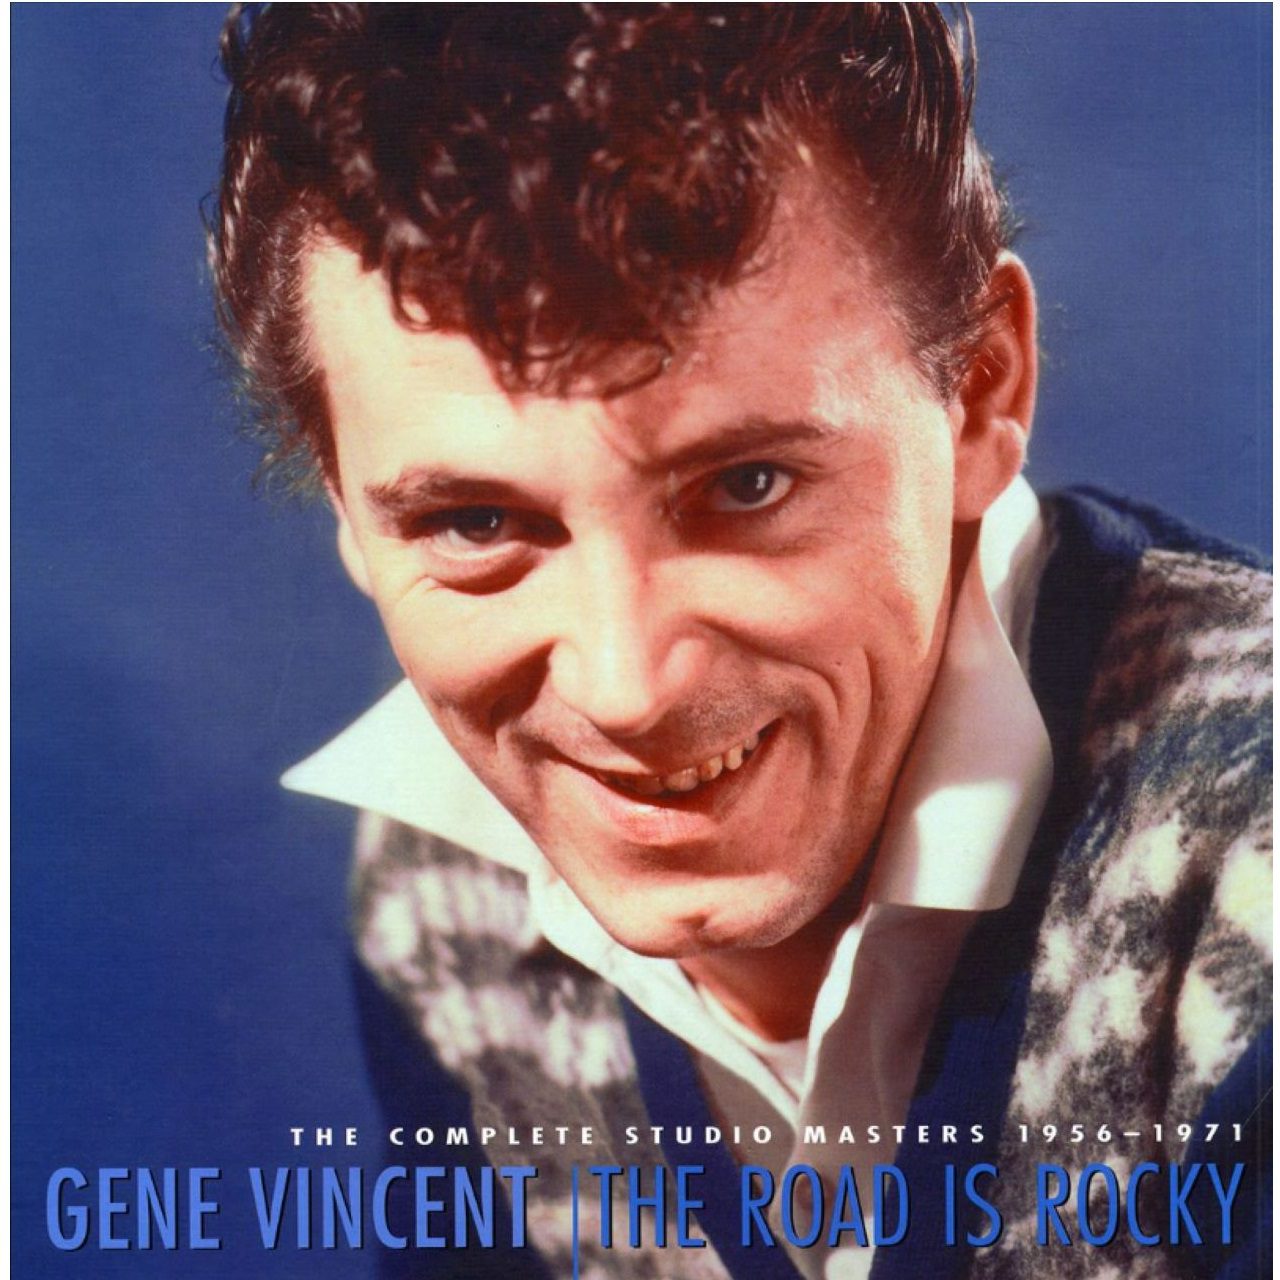 Gene Vincent – “The Road Is Rocky. The complete studio masters 1956-1971”